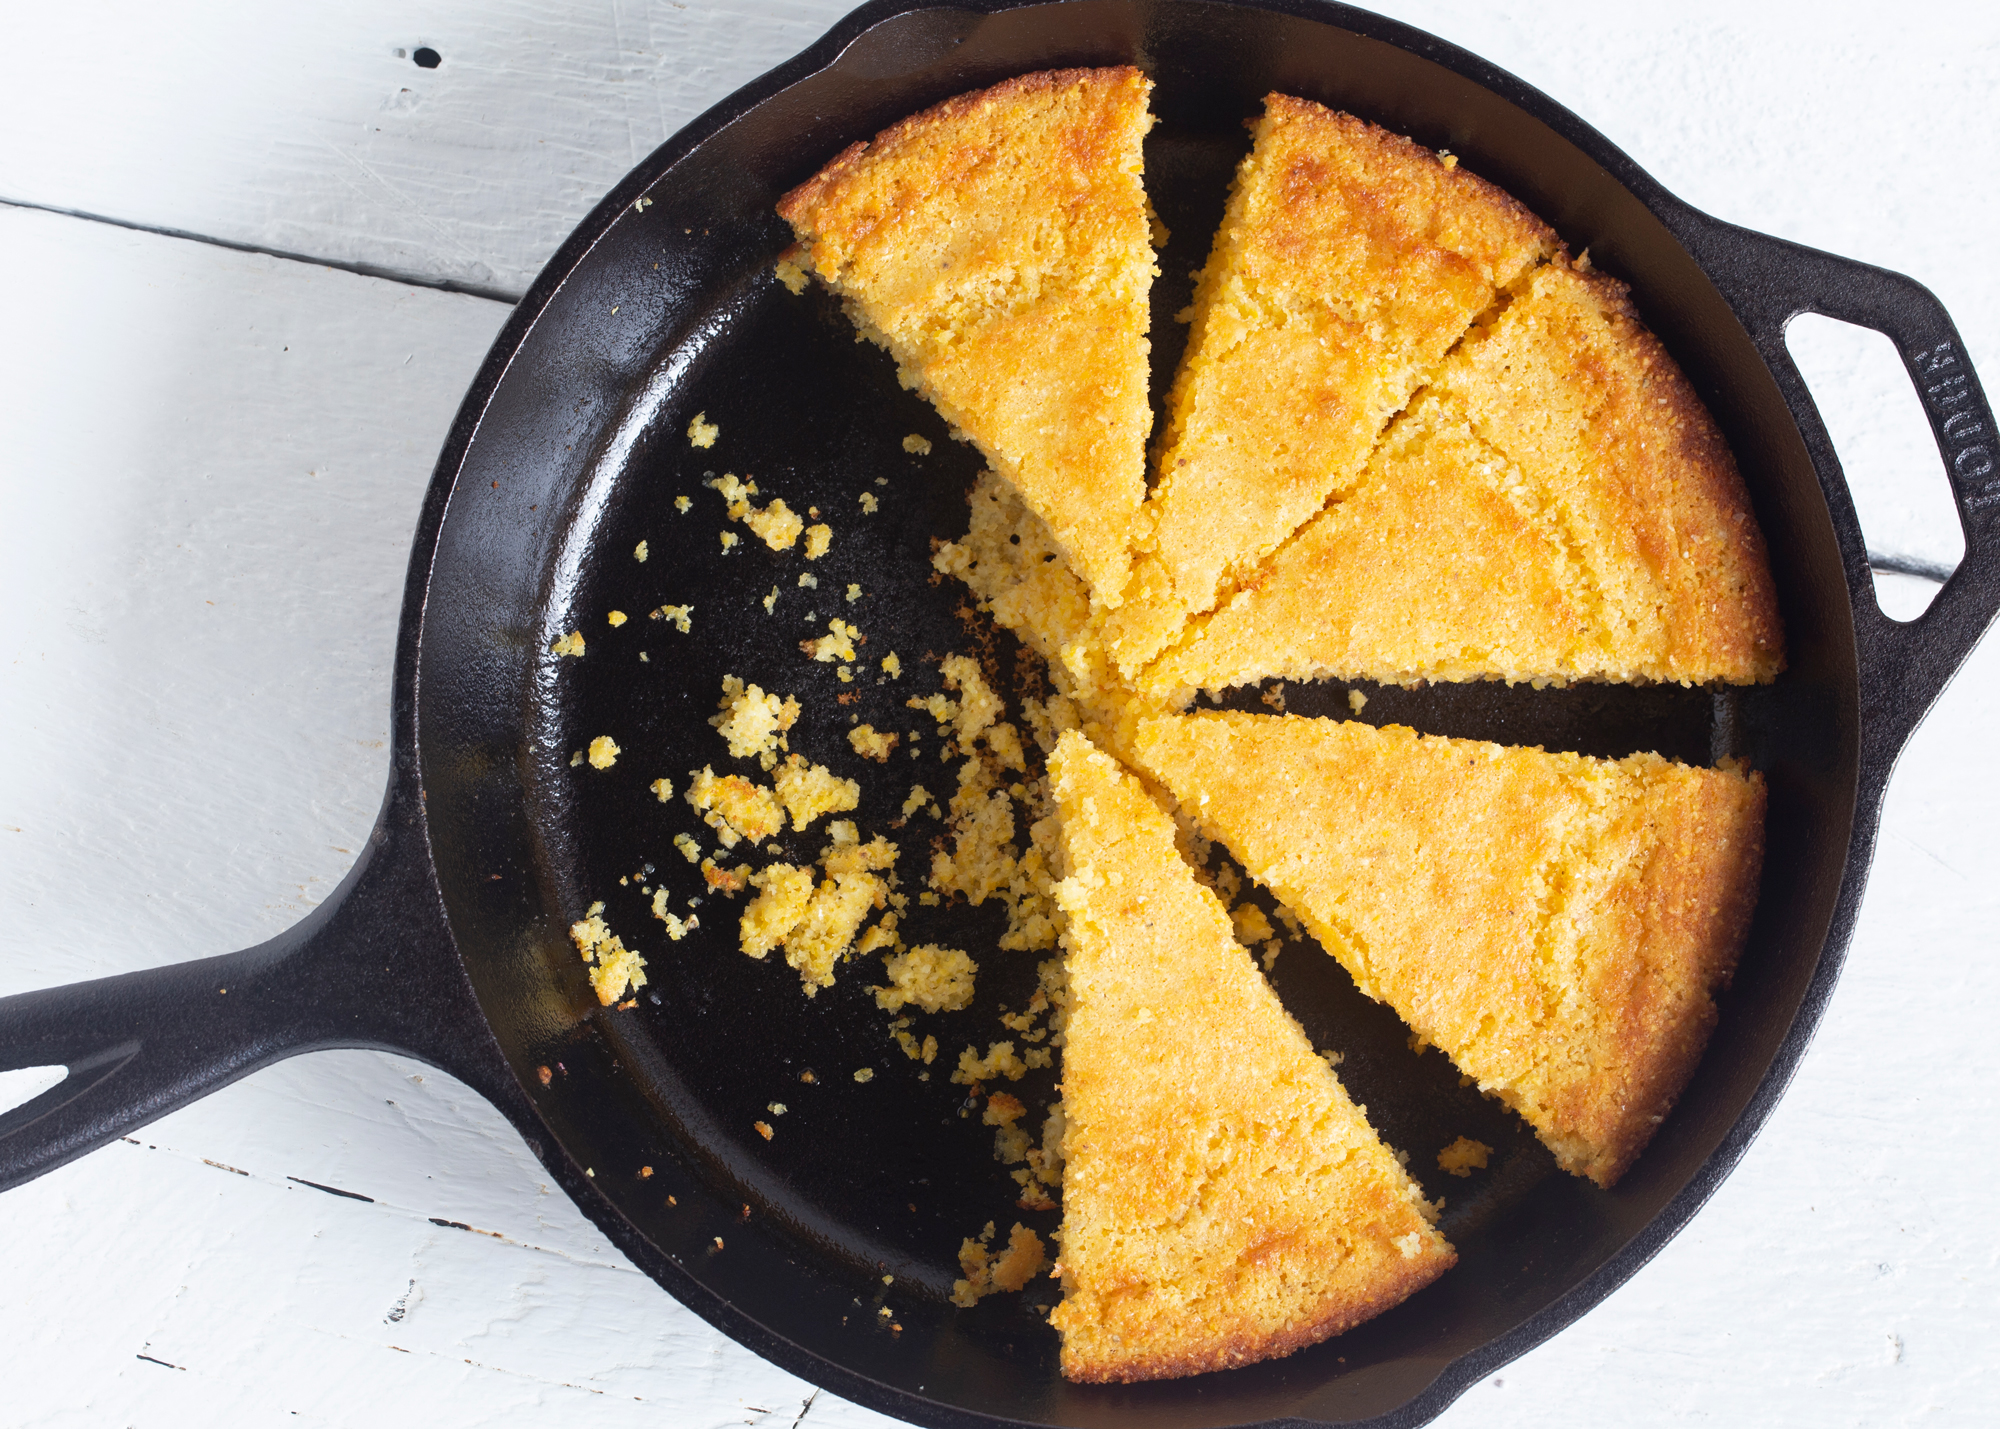 image of some slices of cornbread sitting in a partially empty cast iron skillet on a counter